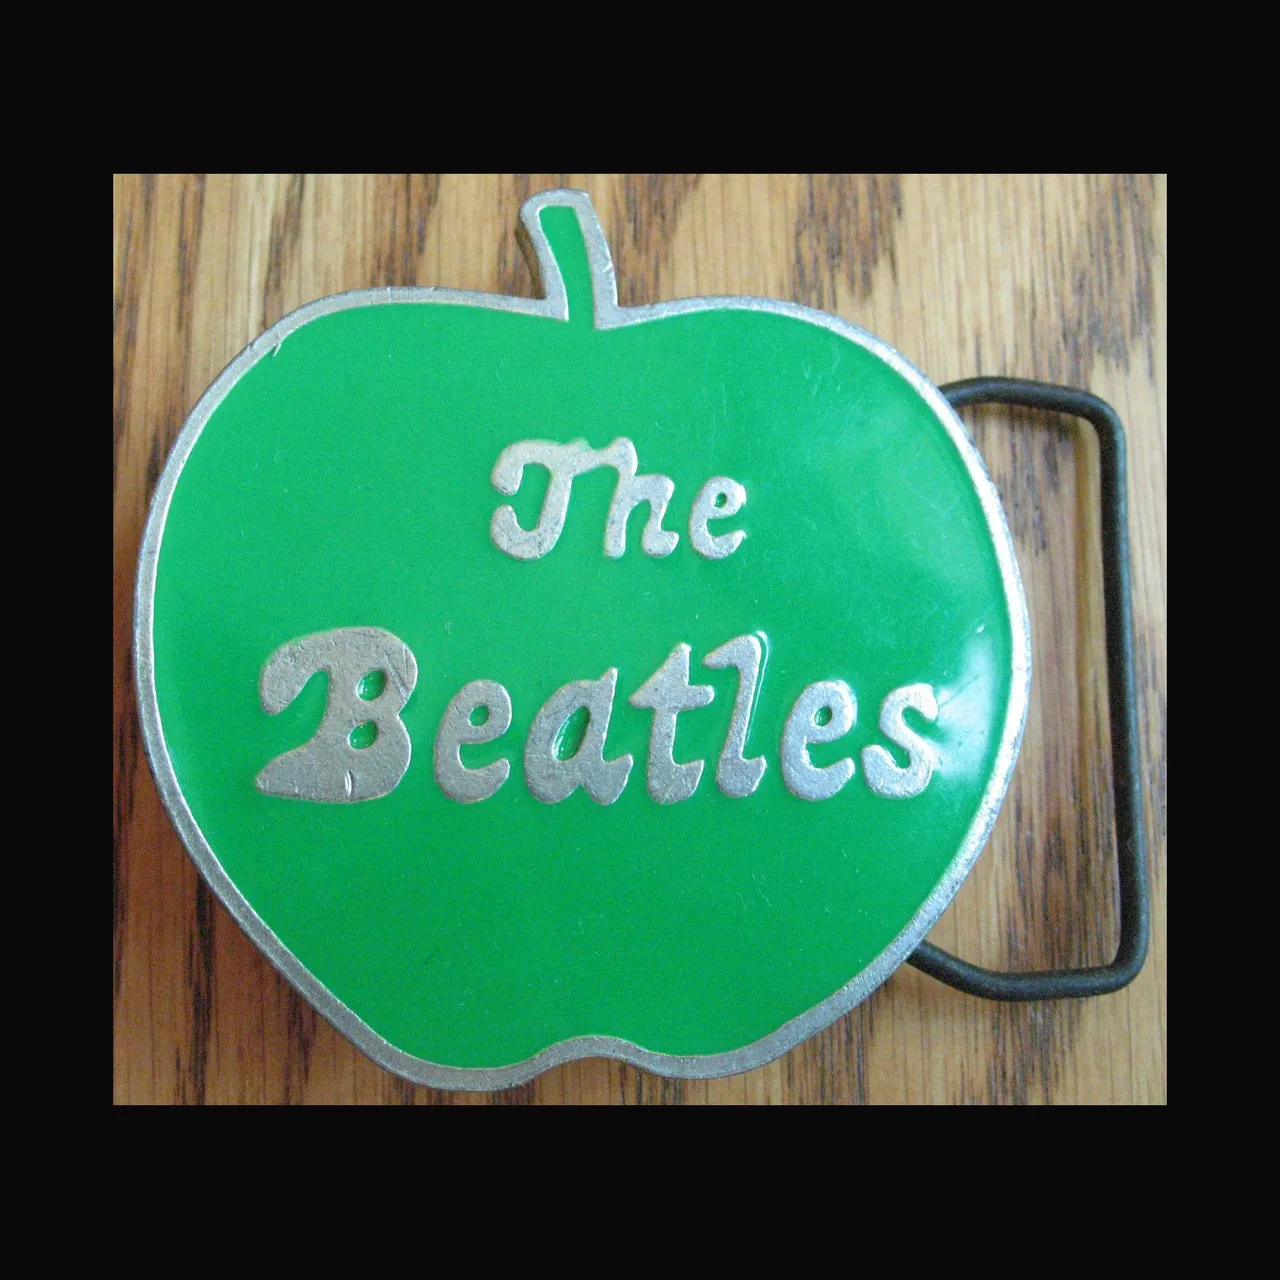 THE BEATLES Belt Buckle Green Apple Made by Apple Corps Ltd. photo 1